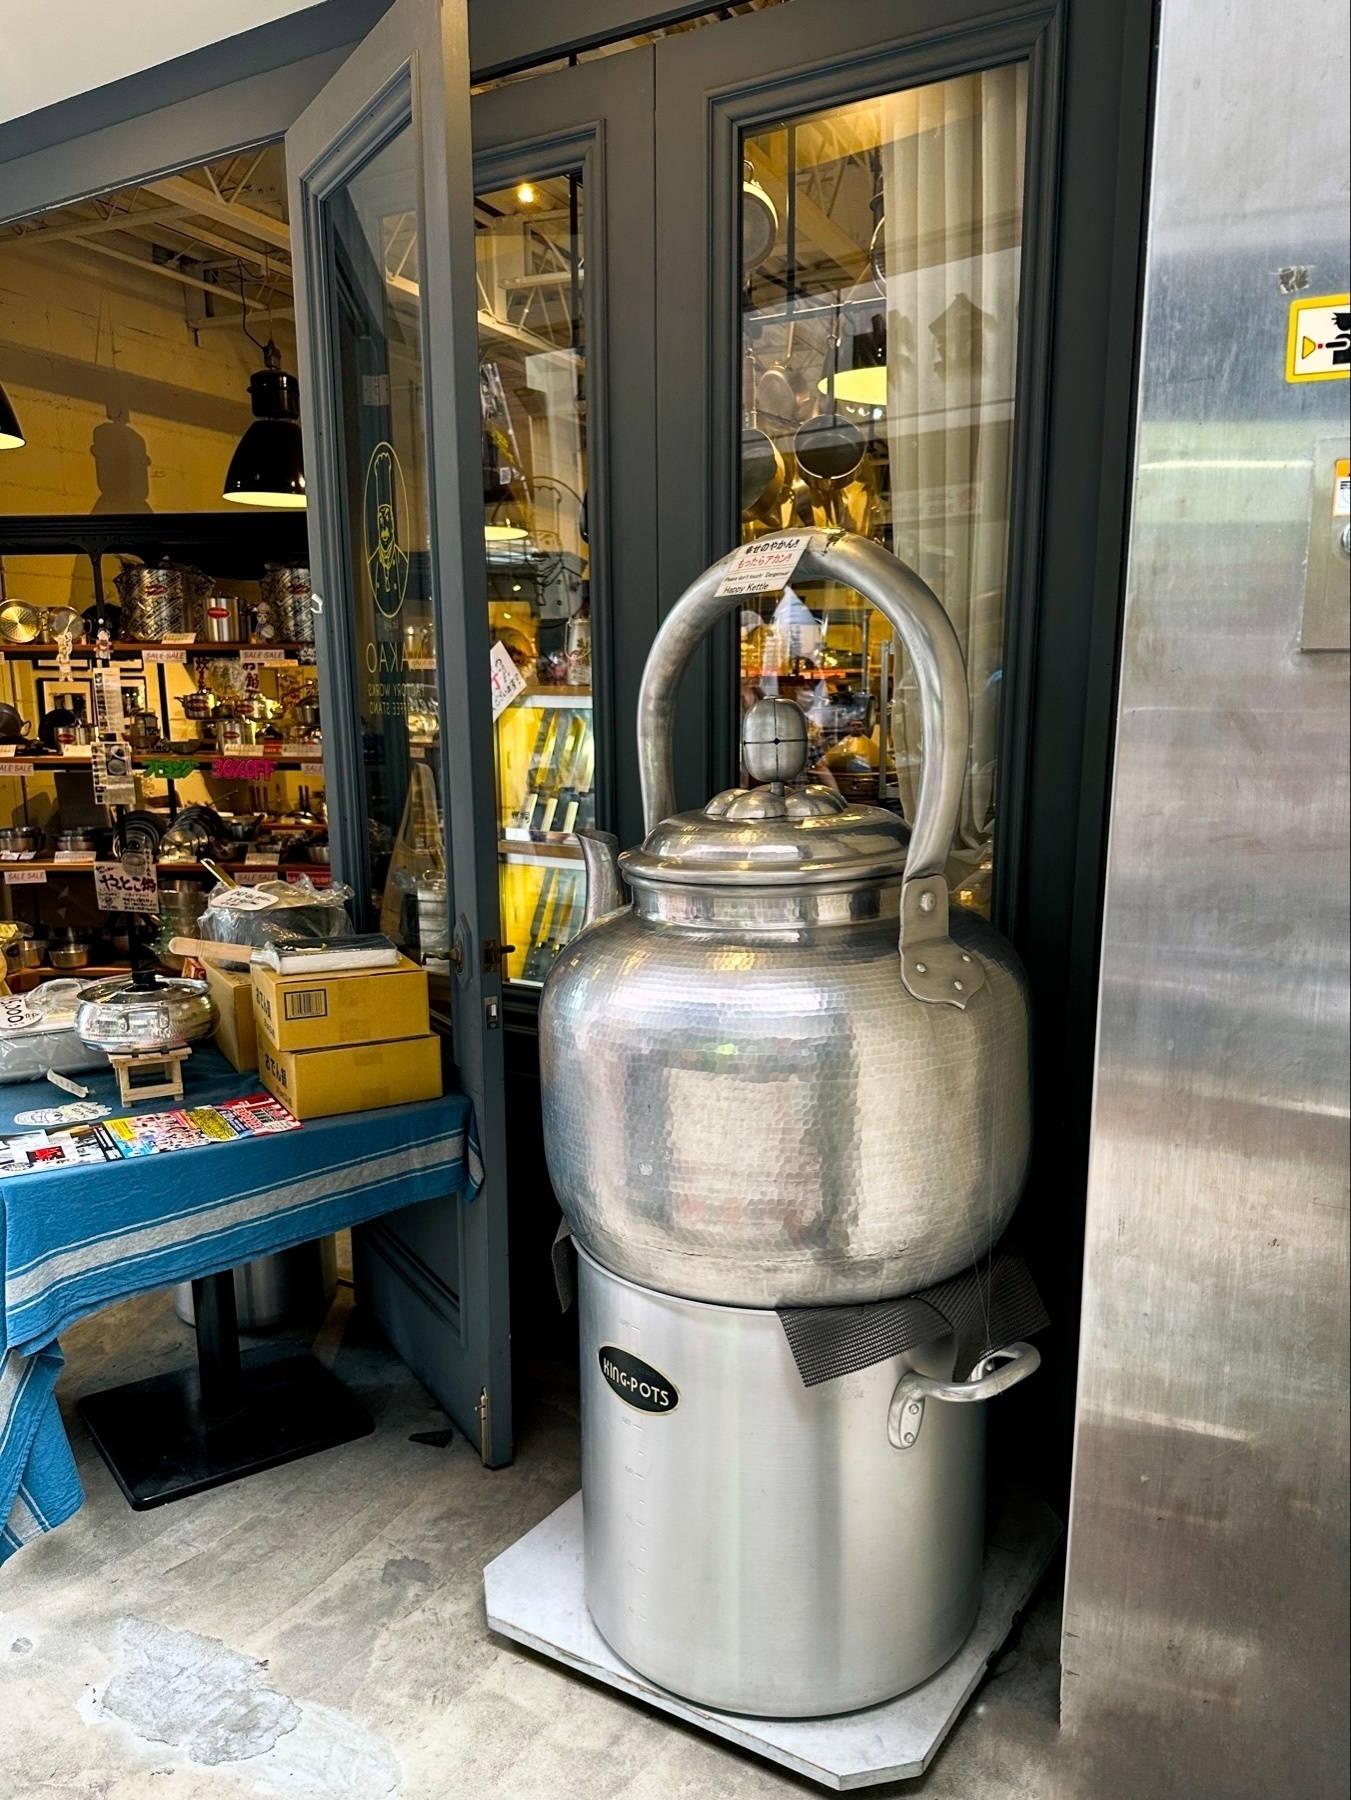 An oversized novelty teapot displayed outside a store, resembling a traditional stove-top kettle.